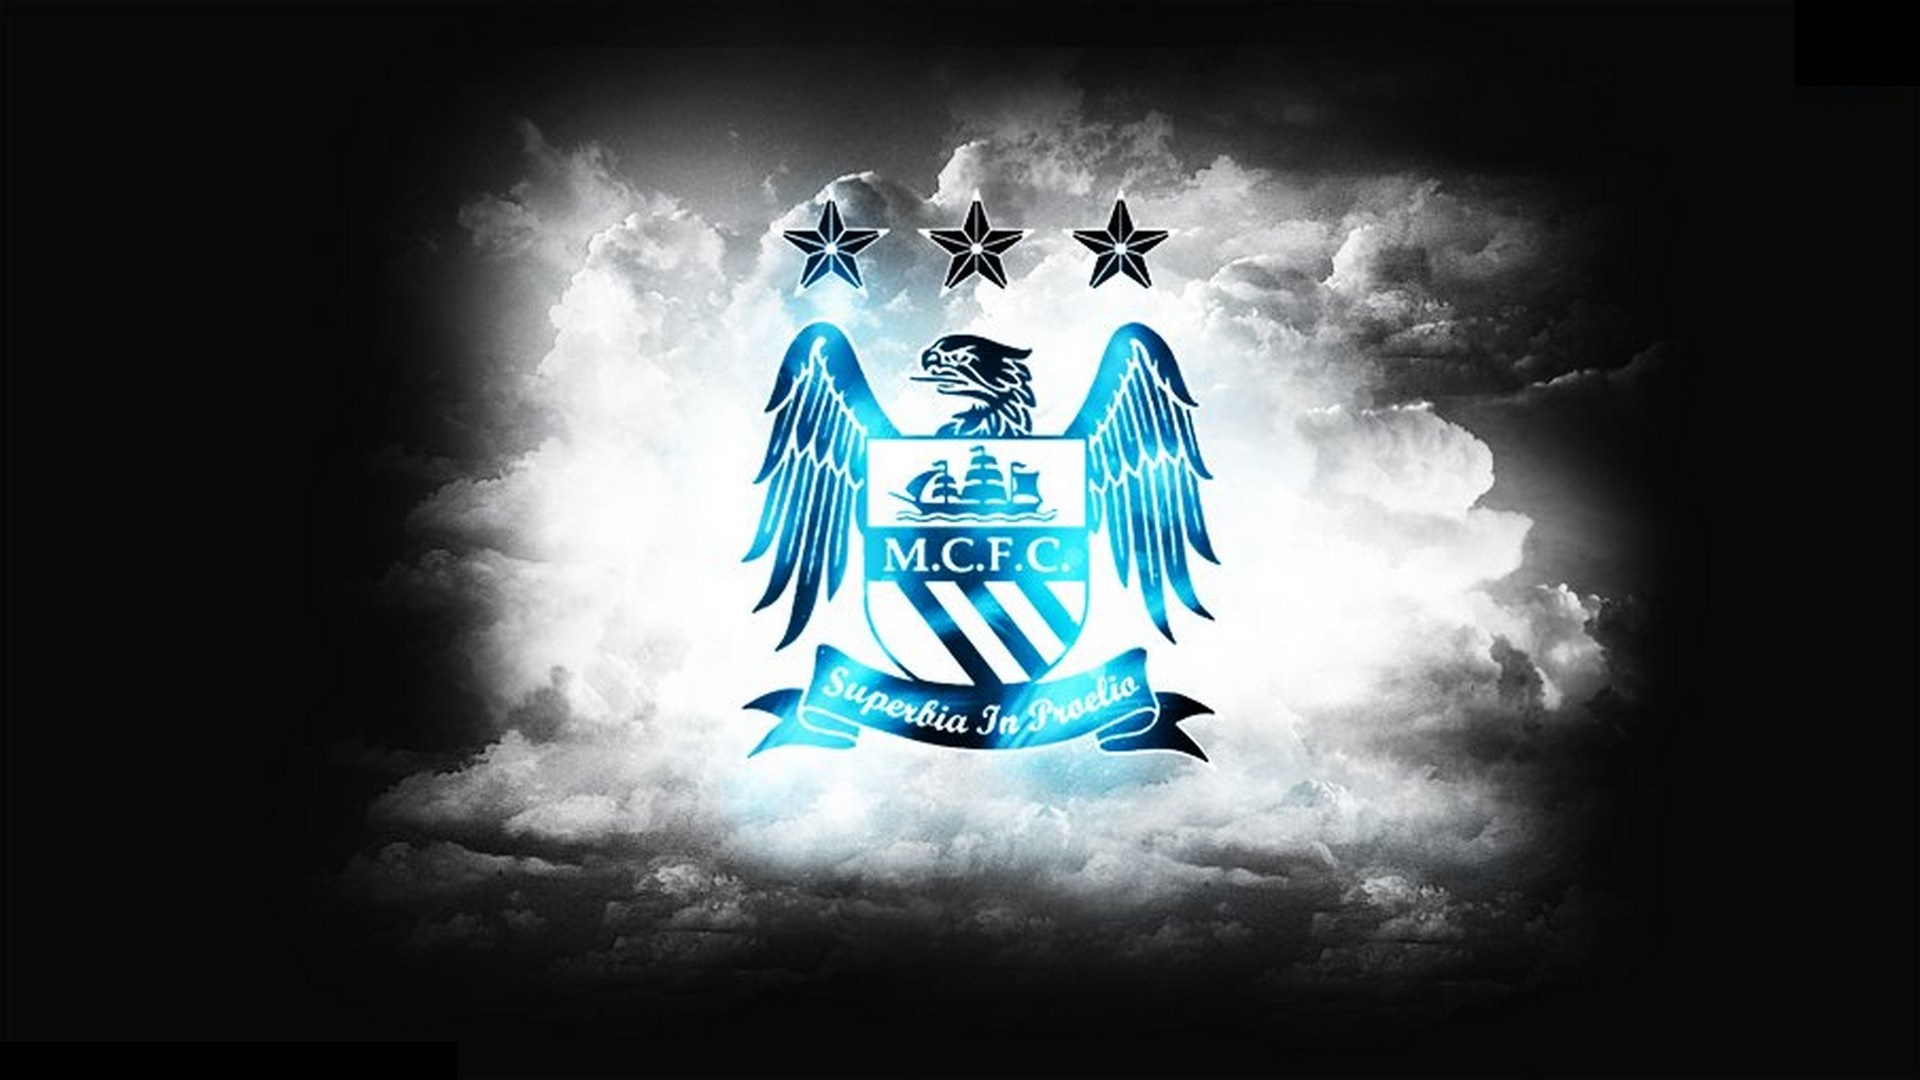 Manchester City Desktop Wallpapers With high-resolution 1920X1080 pixel. You can use this wallpaper for your Desktop Computers, Mac Screensavers, Windows Backgrounds, iPhone Wallpapers, Tablet or Android Lock screen and another Mobile device